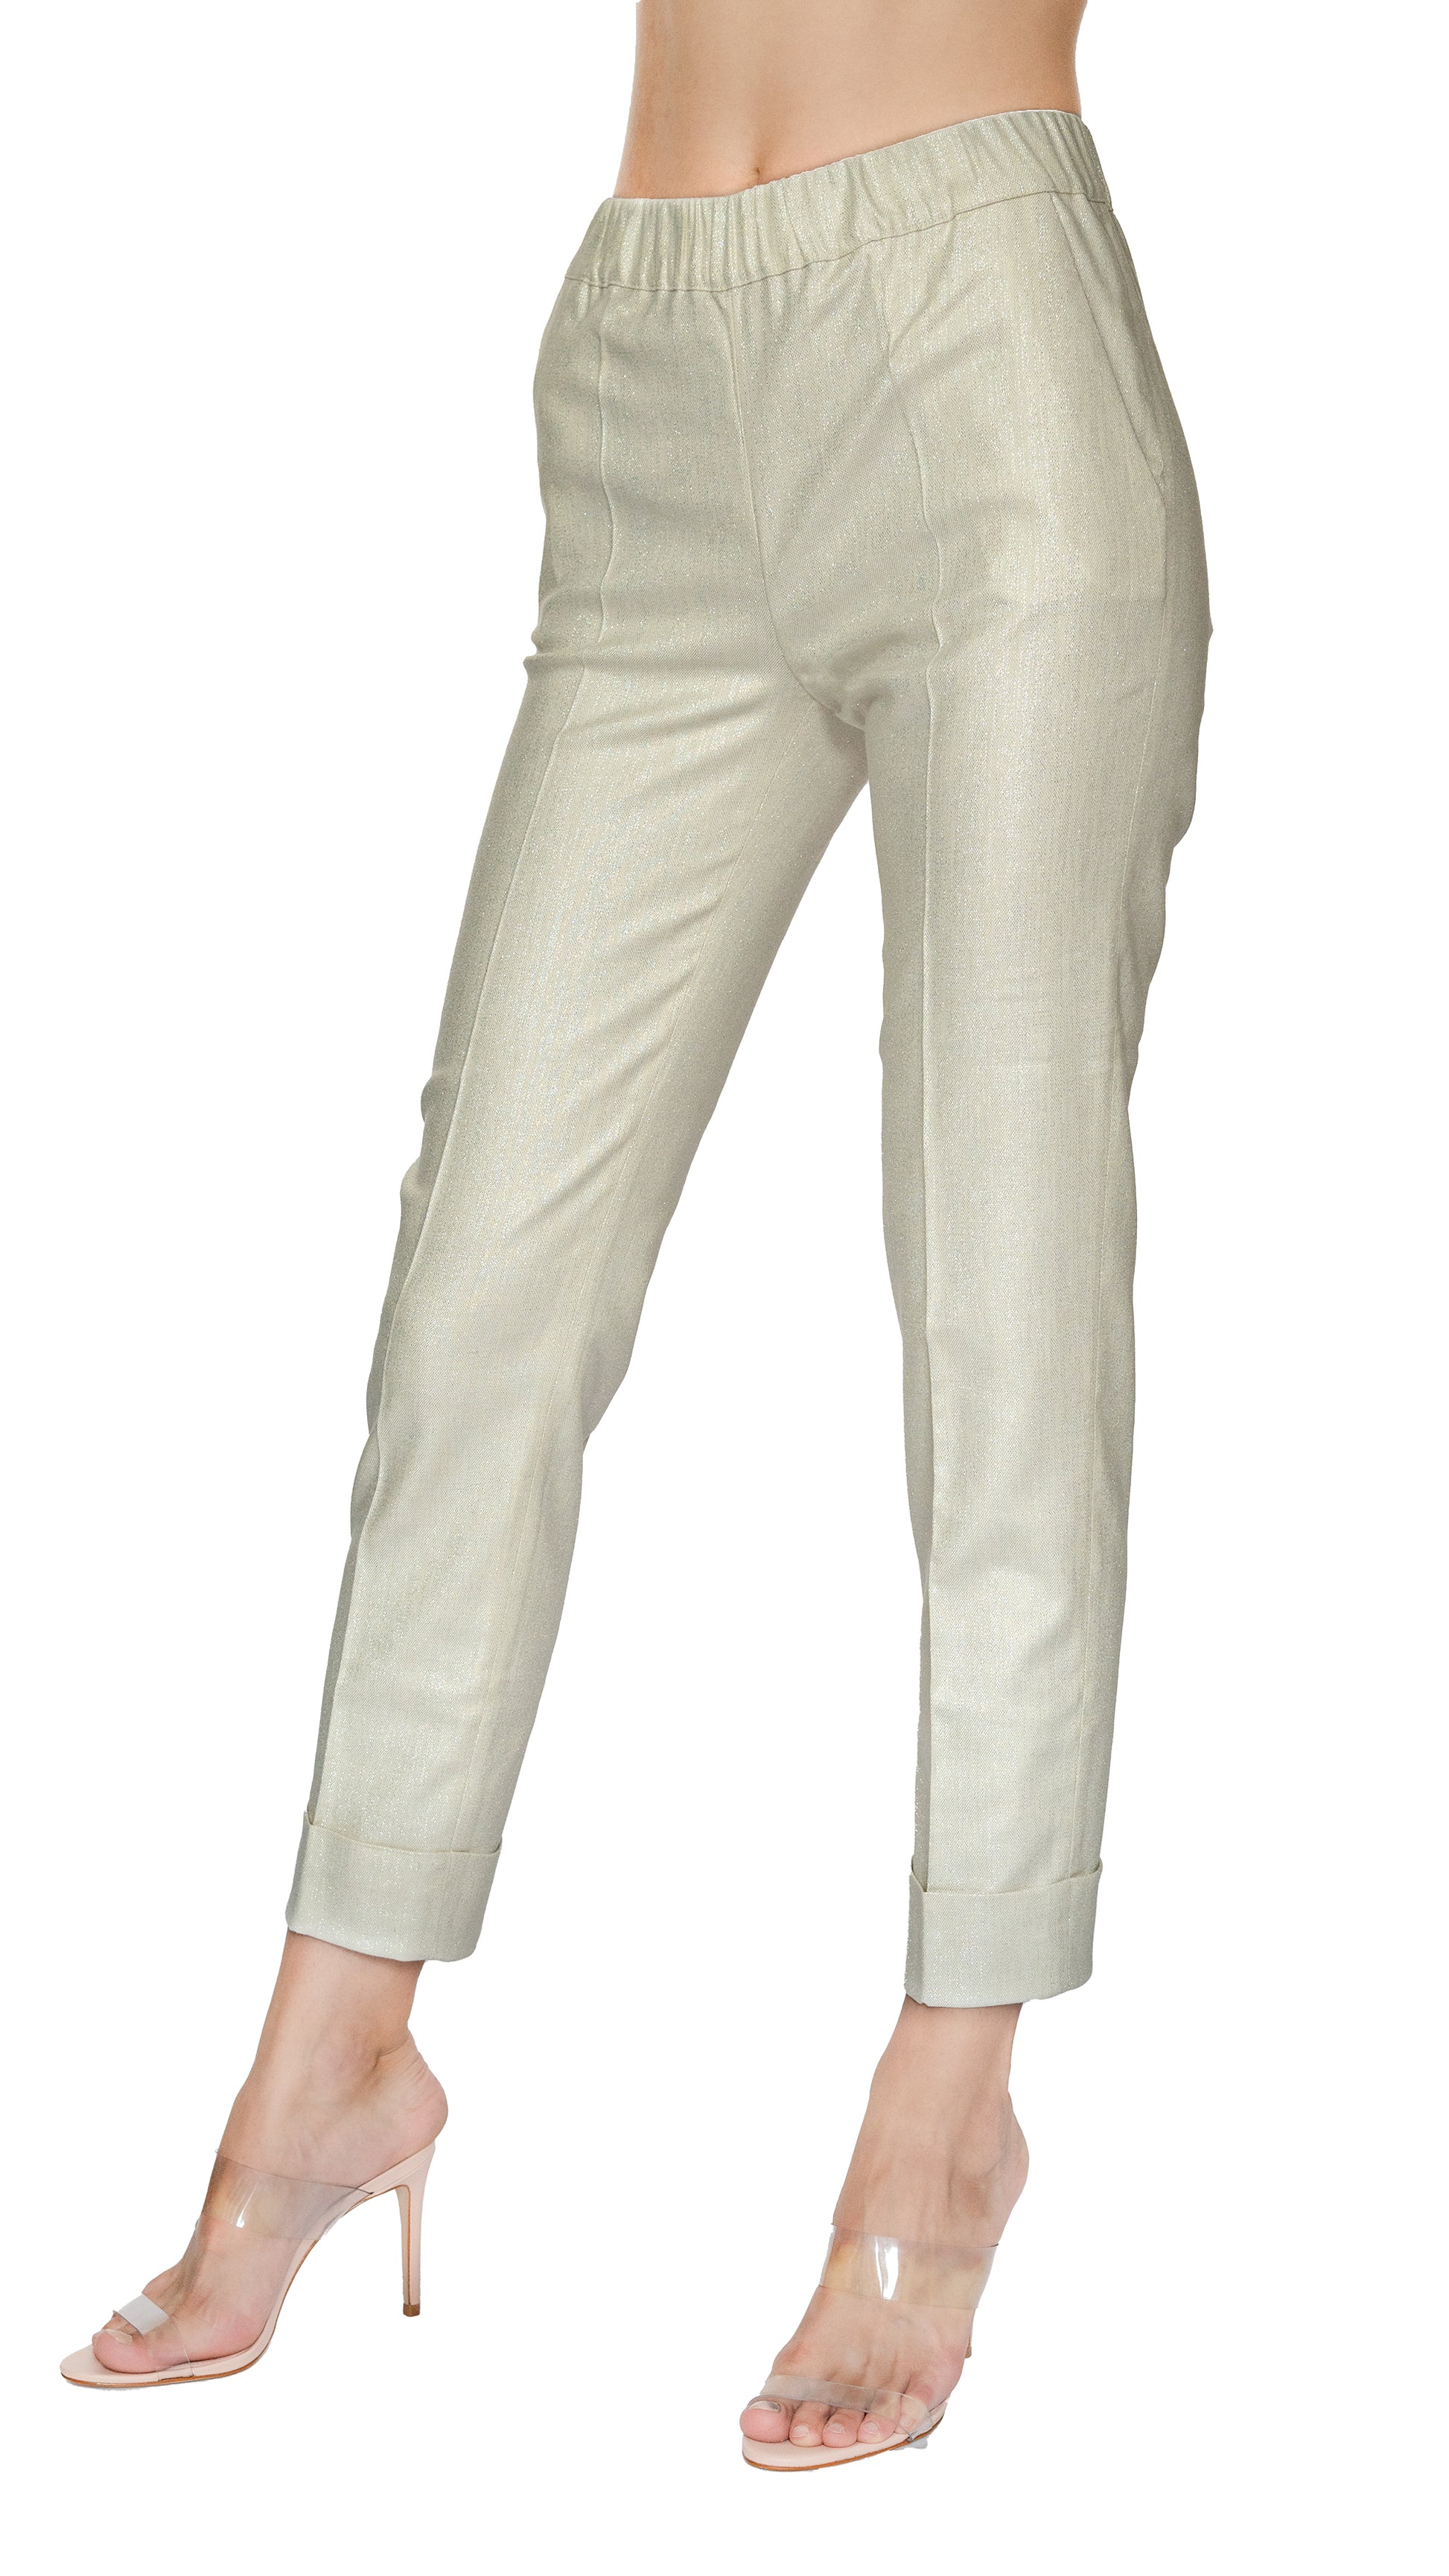 D. Exterior pants in cream color